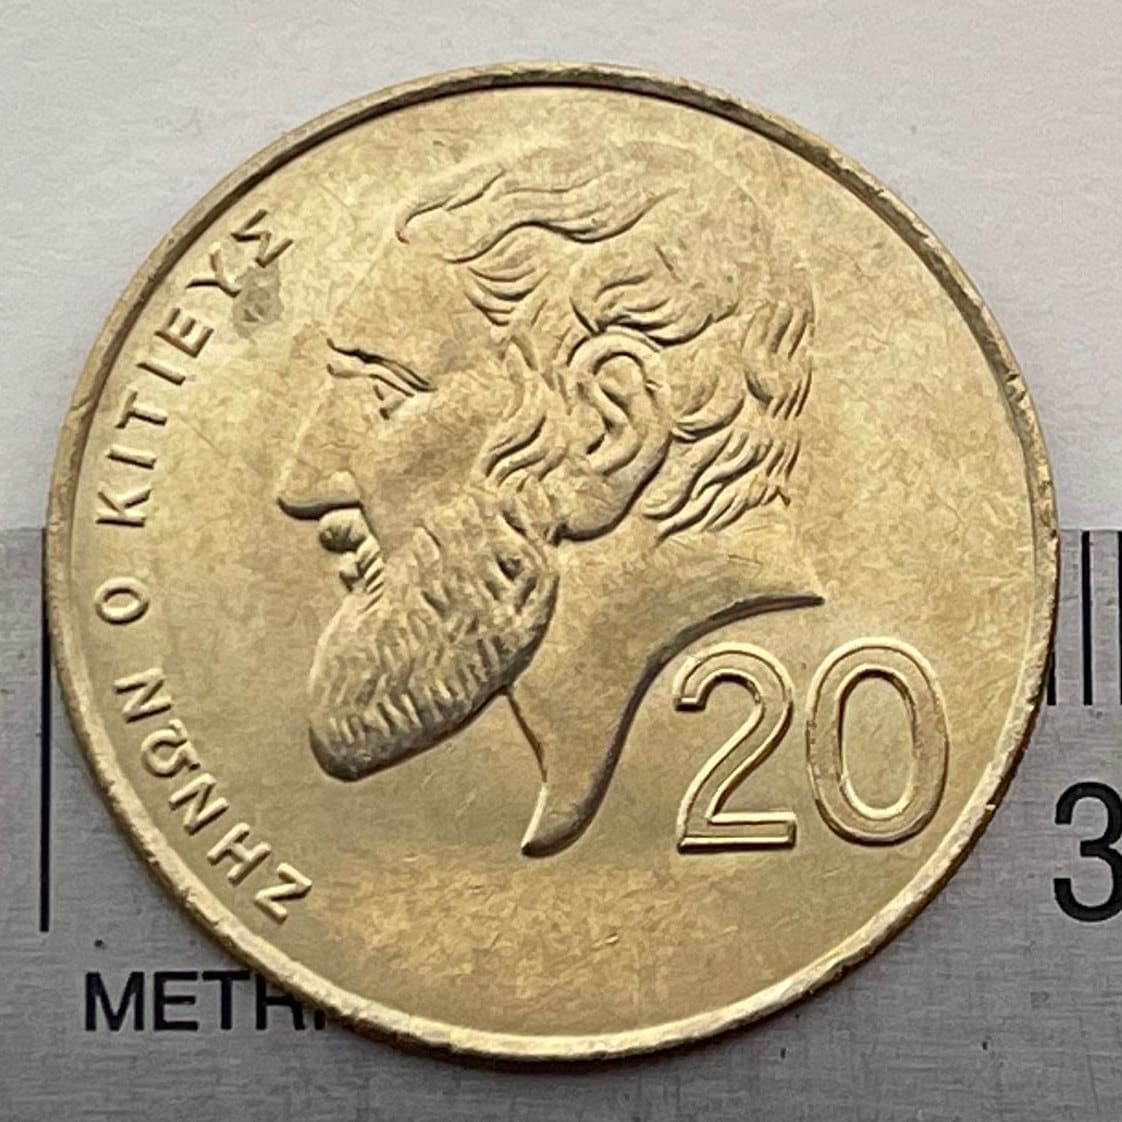 Zeno the Stoic & Dove with Olive Twig 20 Cents Cyprus Authentic Coin Money for Jewelry and Crafts (1960) (Greek Philosopher) (Citium)